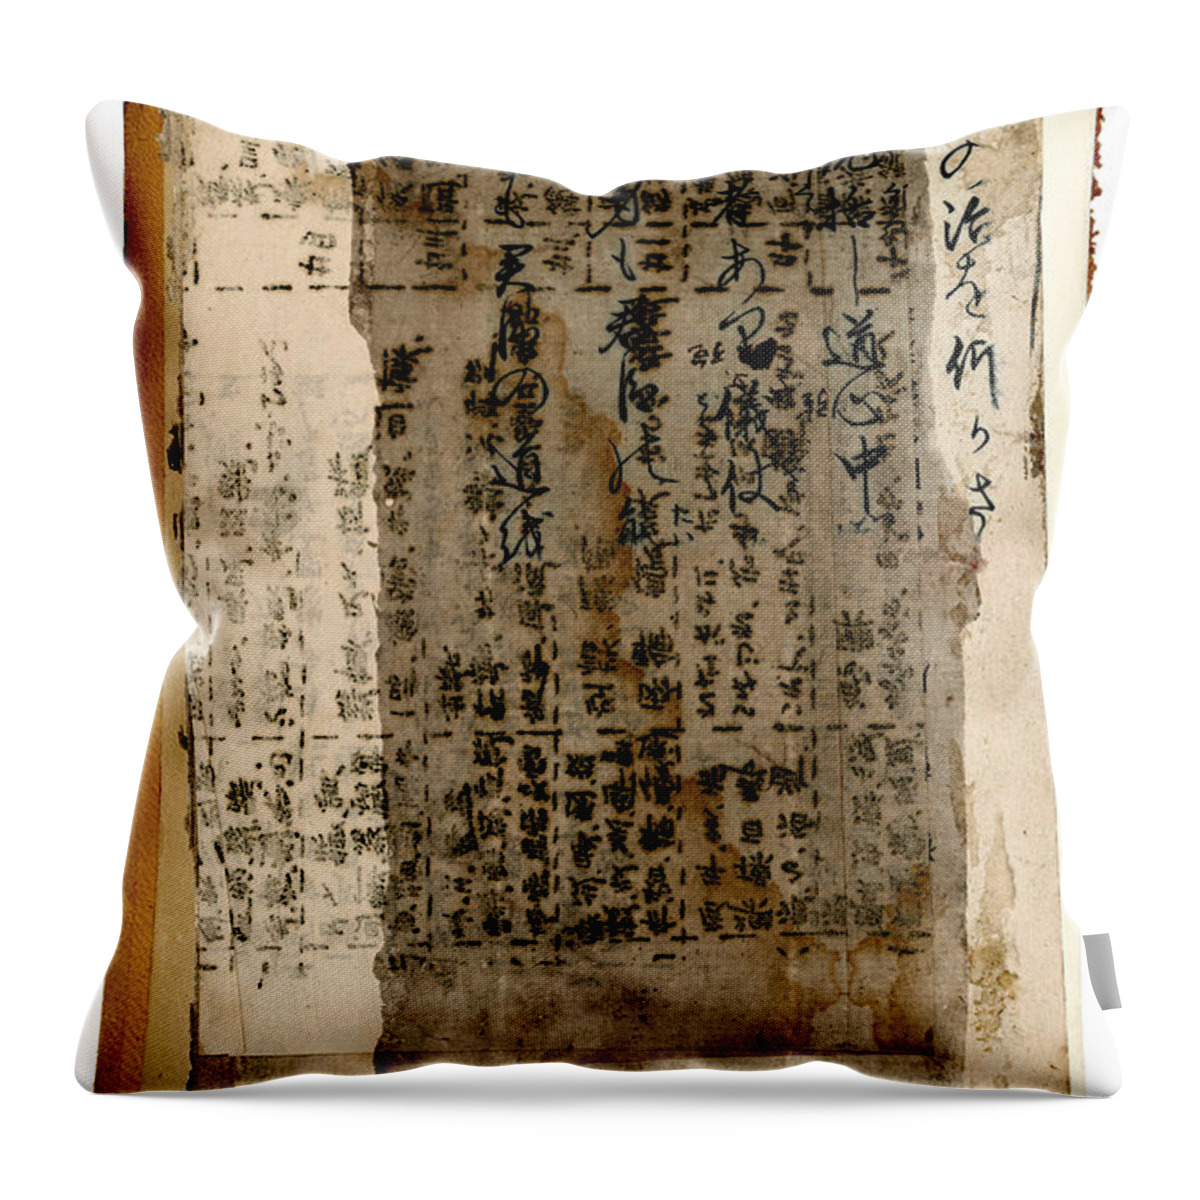 Japan Throw Pillow featuring the photograph Weathered Pages by Carol Leigh